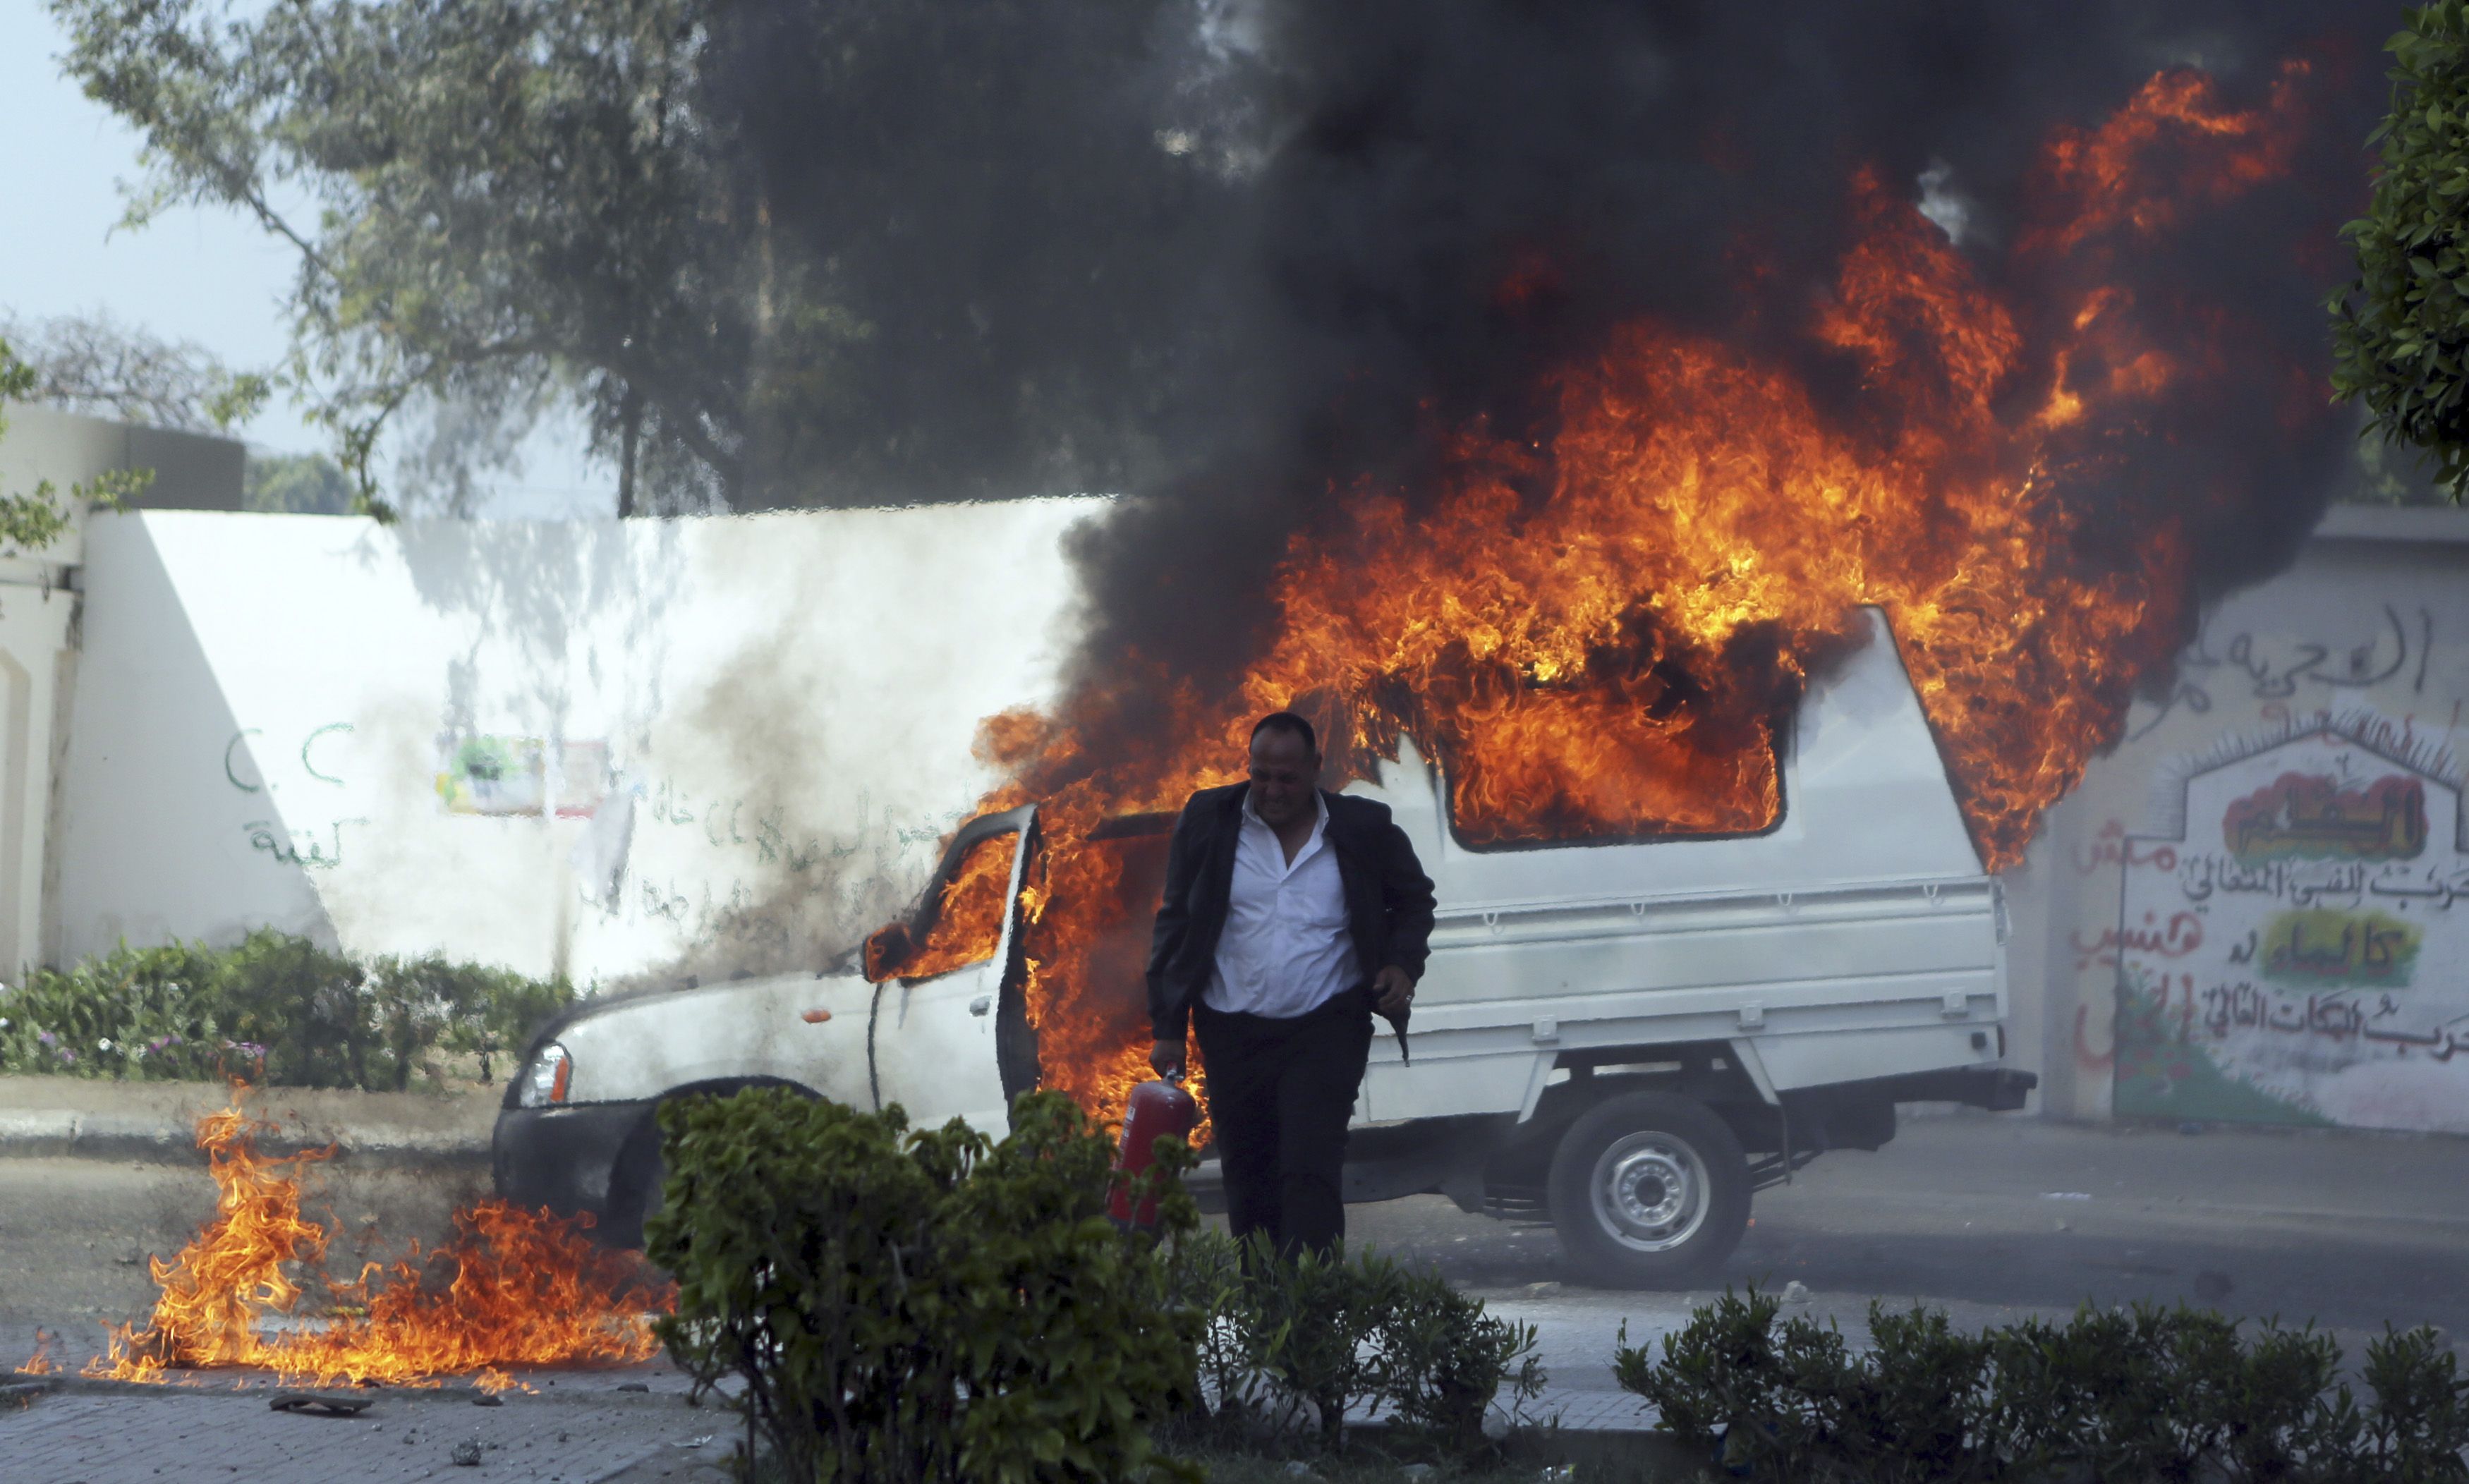 Security forces go in Azhar University to confront violence - MENA